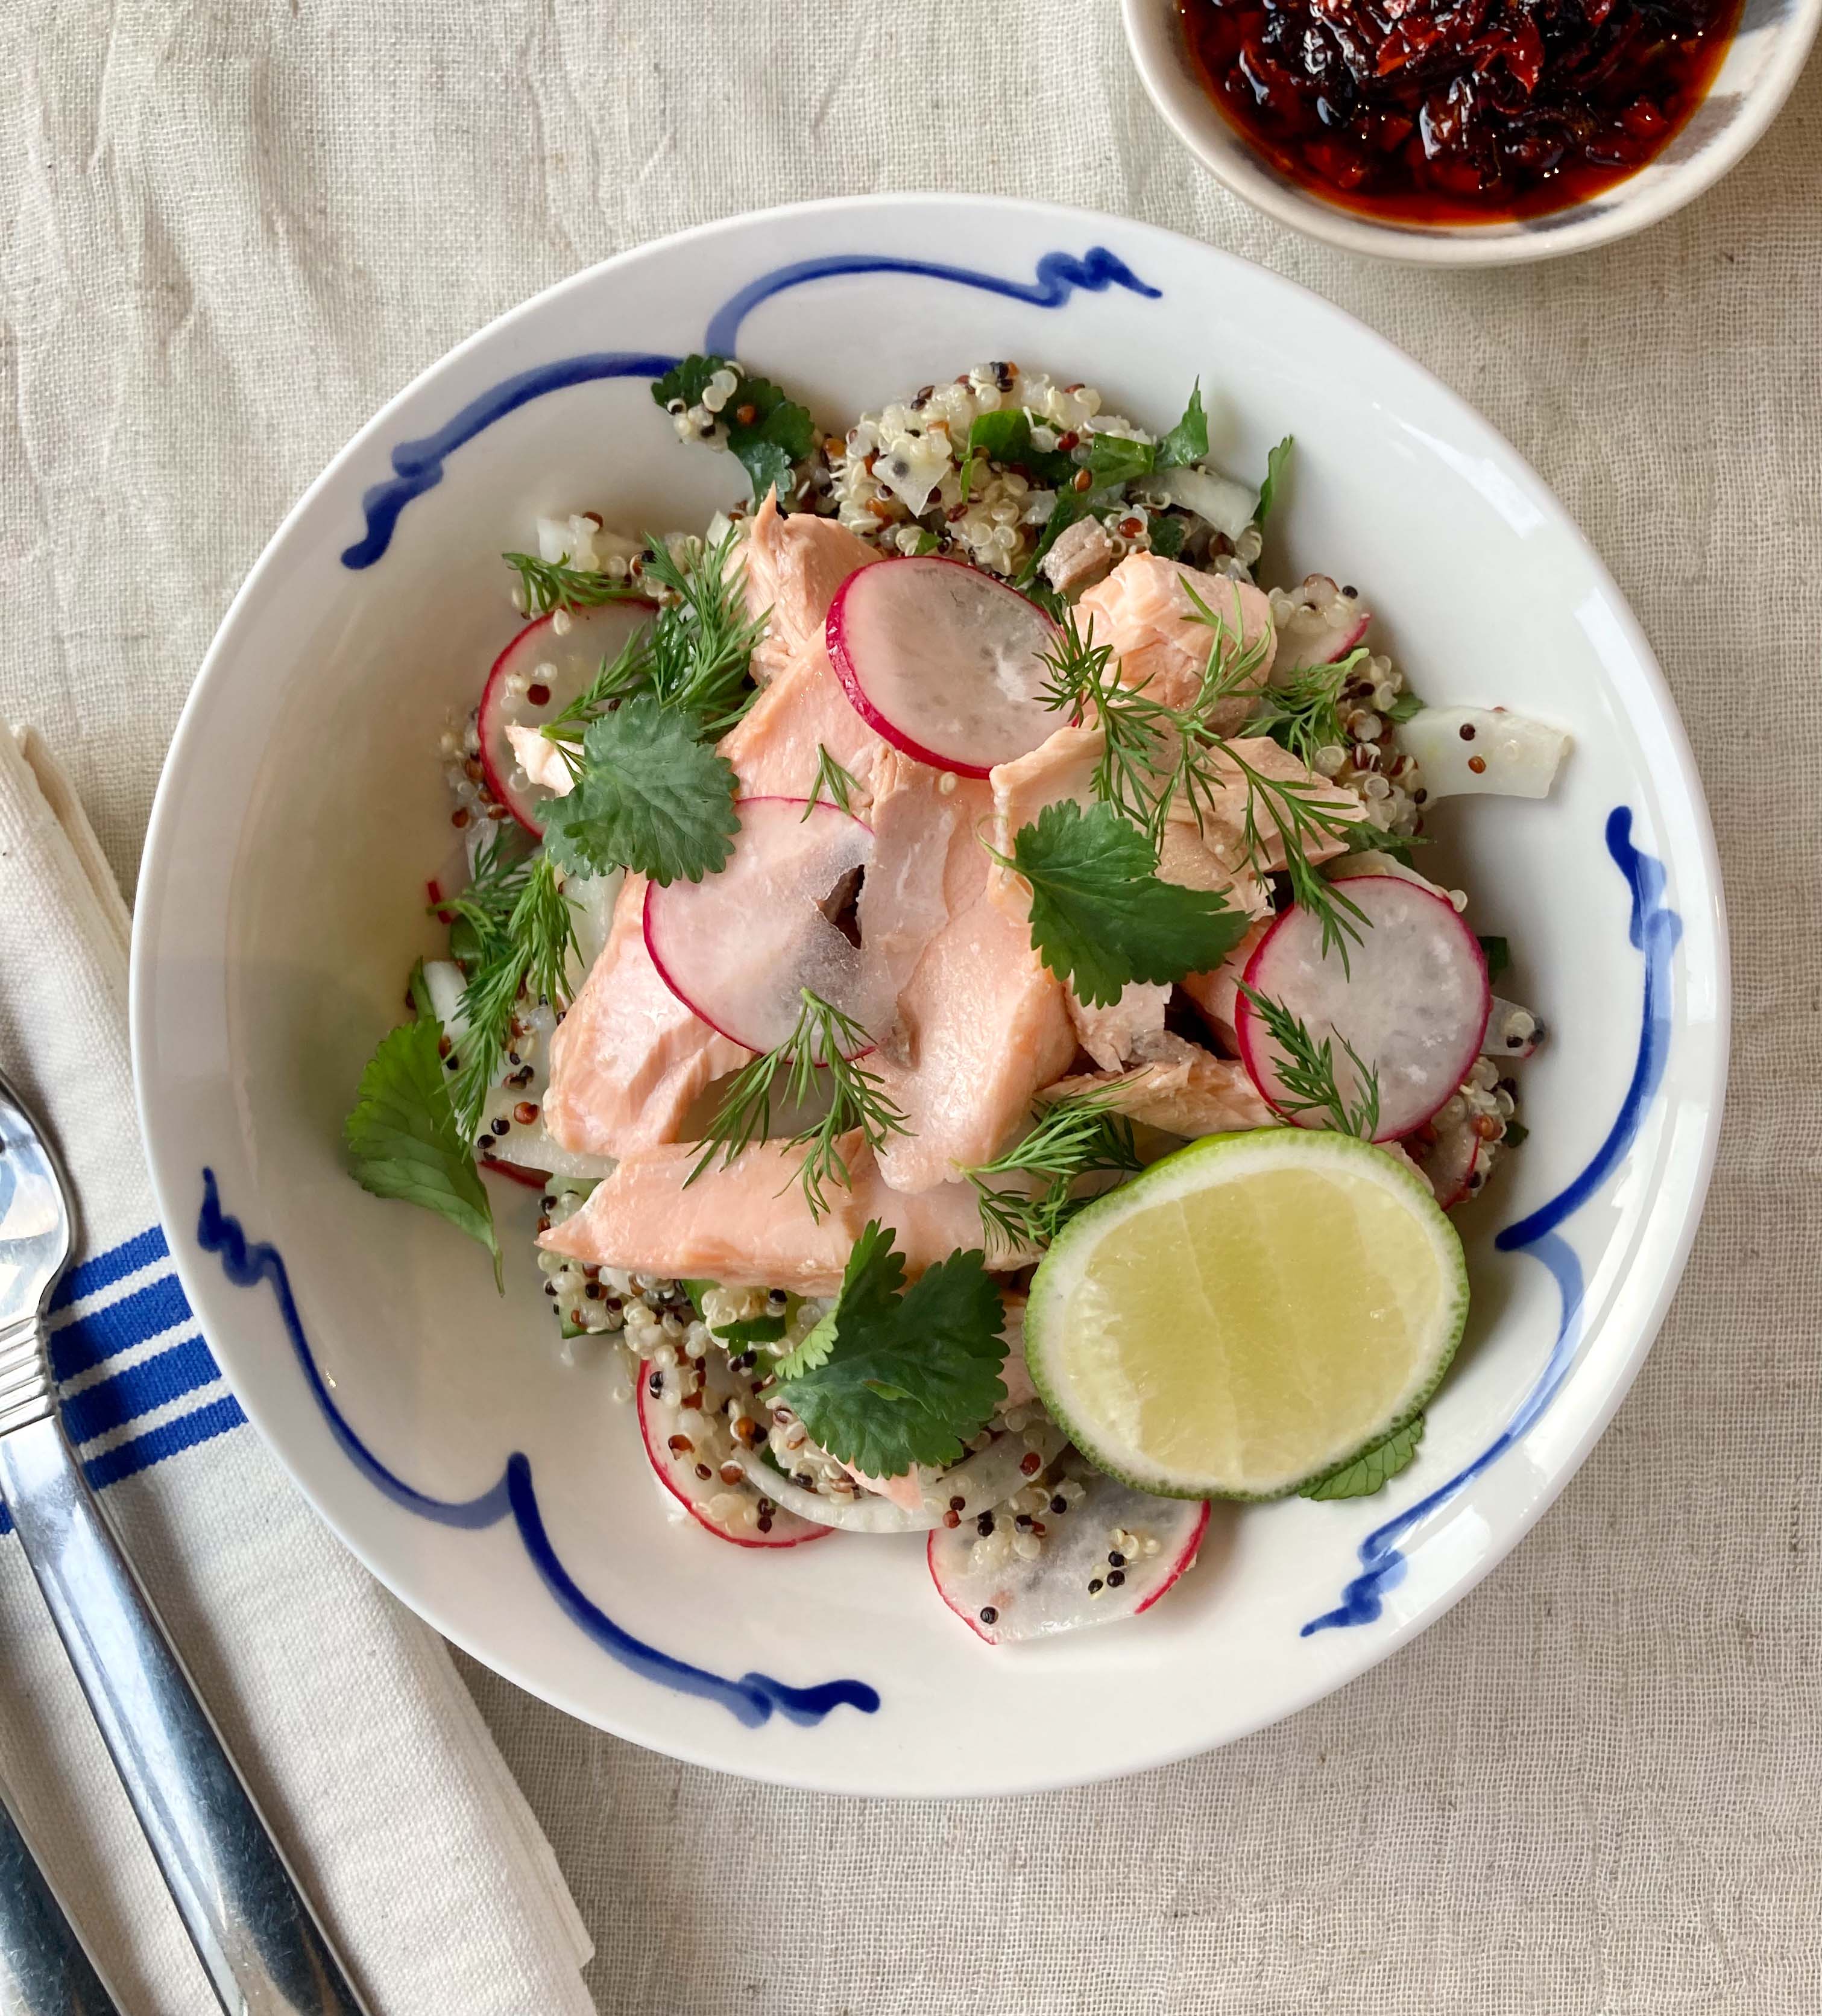 Slow-roasted sesame salmon with lime & ginger quinoa salad